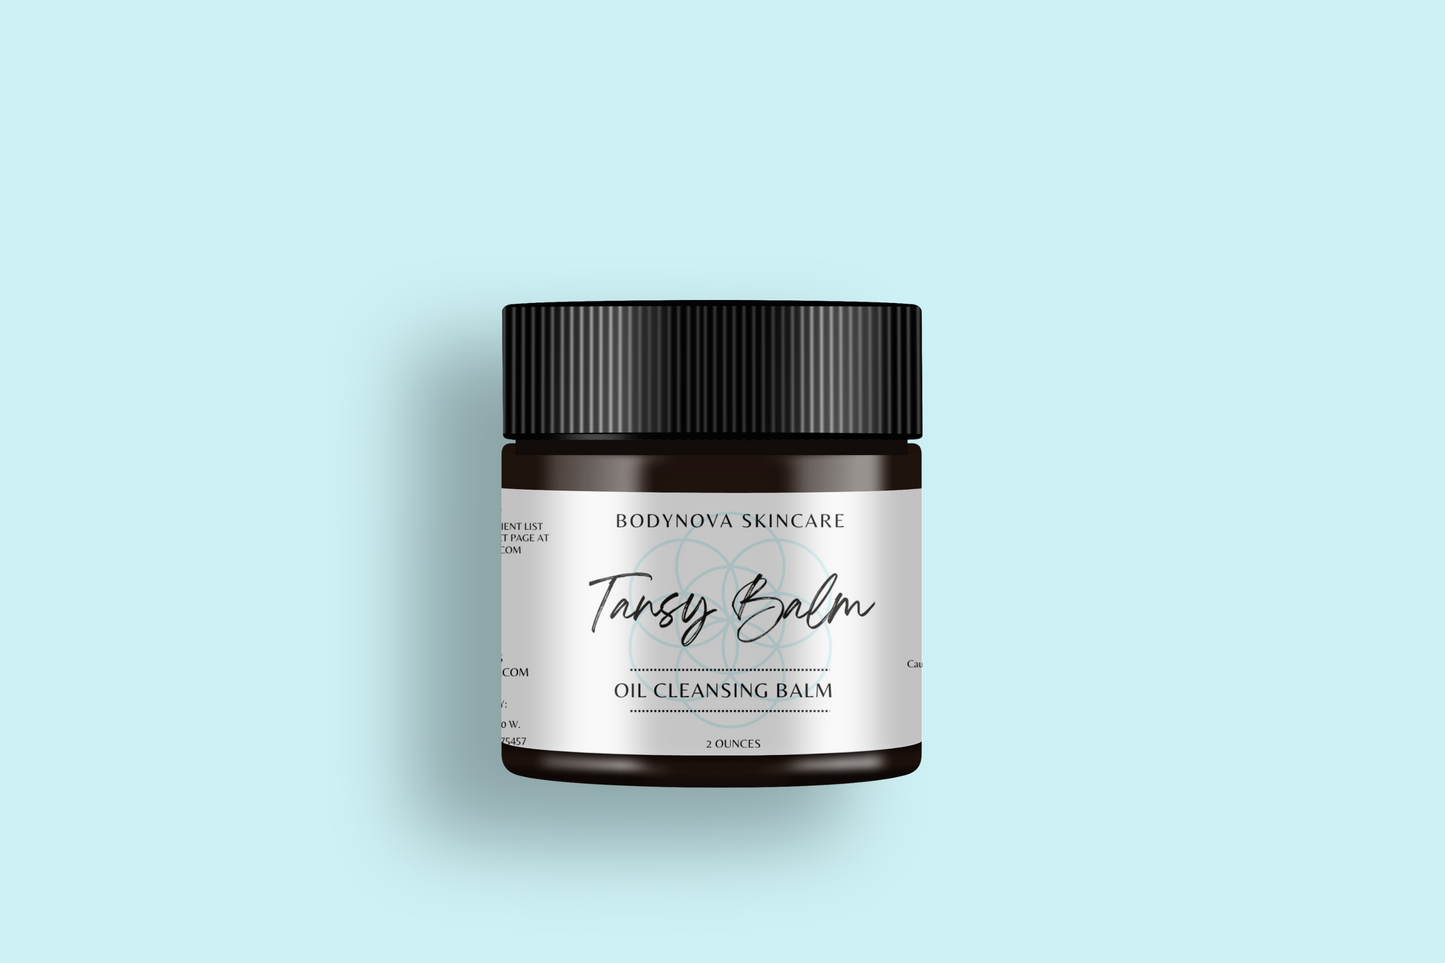 Tansy Balm - Oil Cleansing Balm